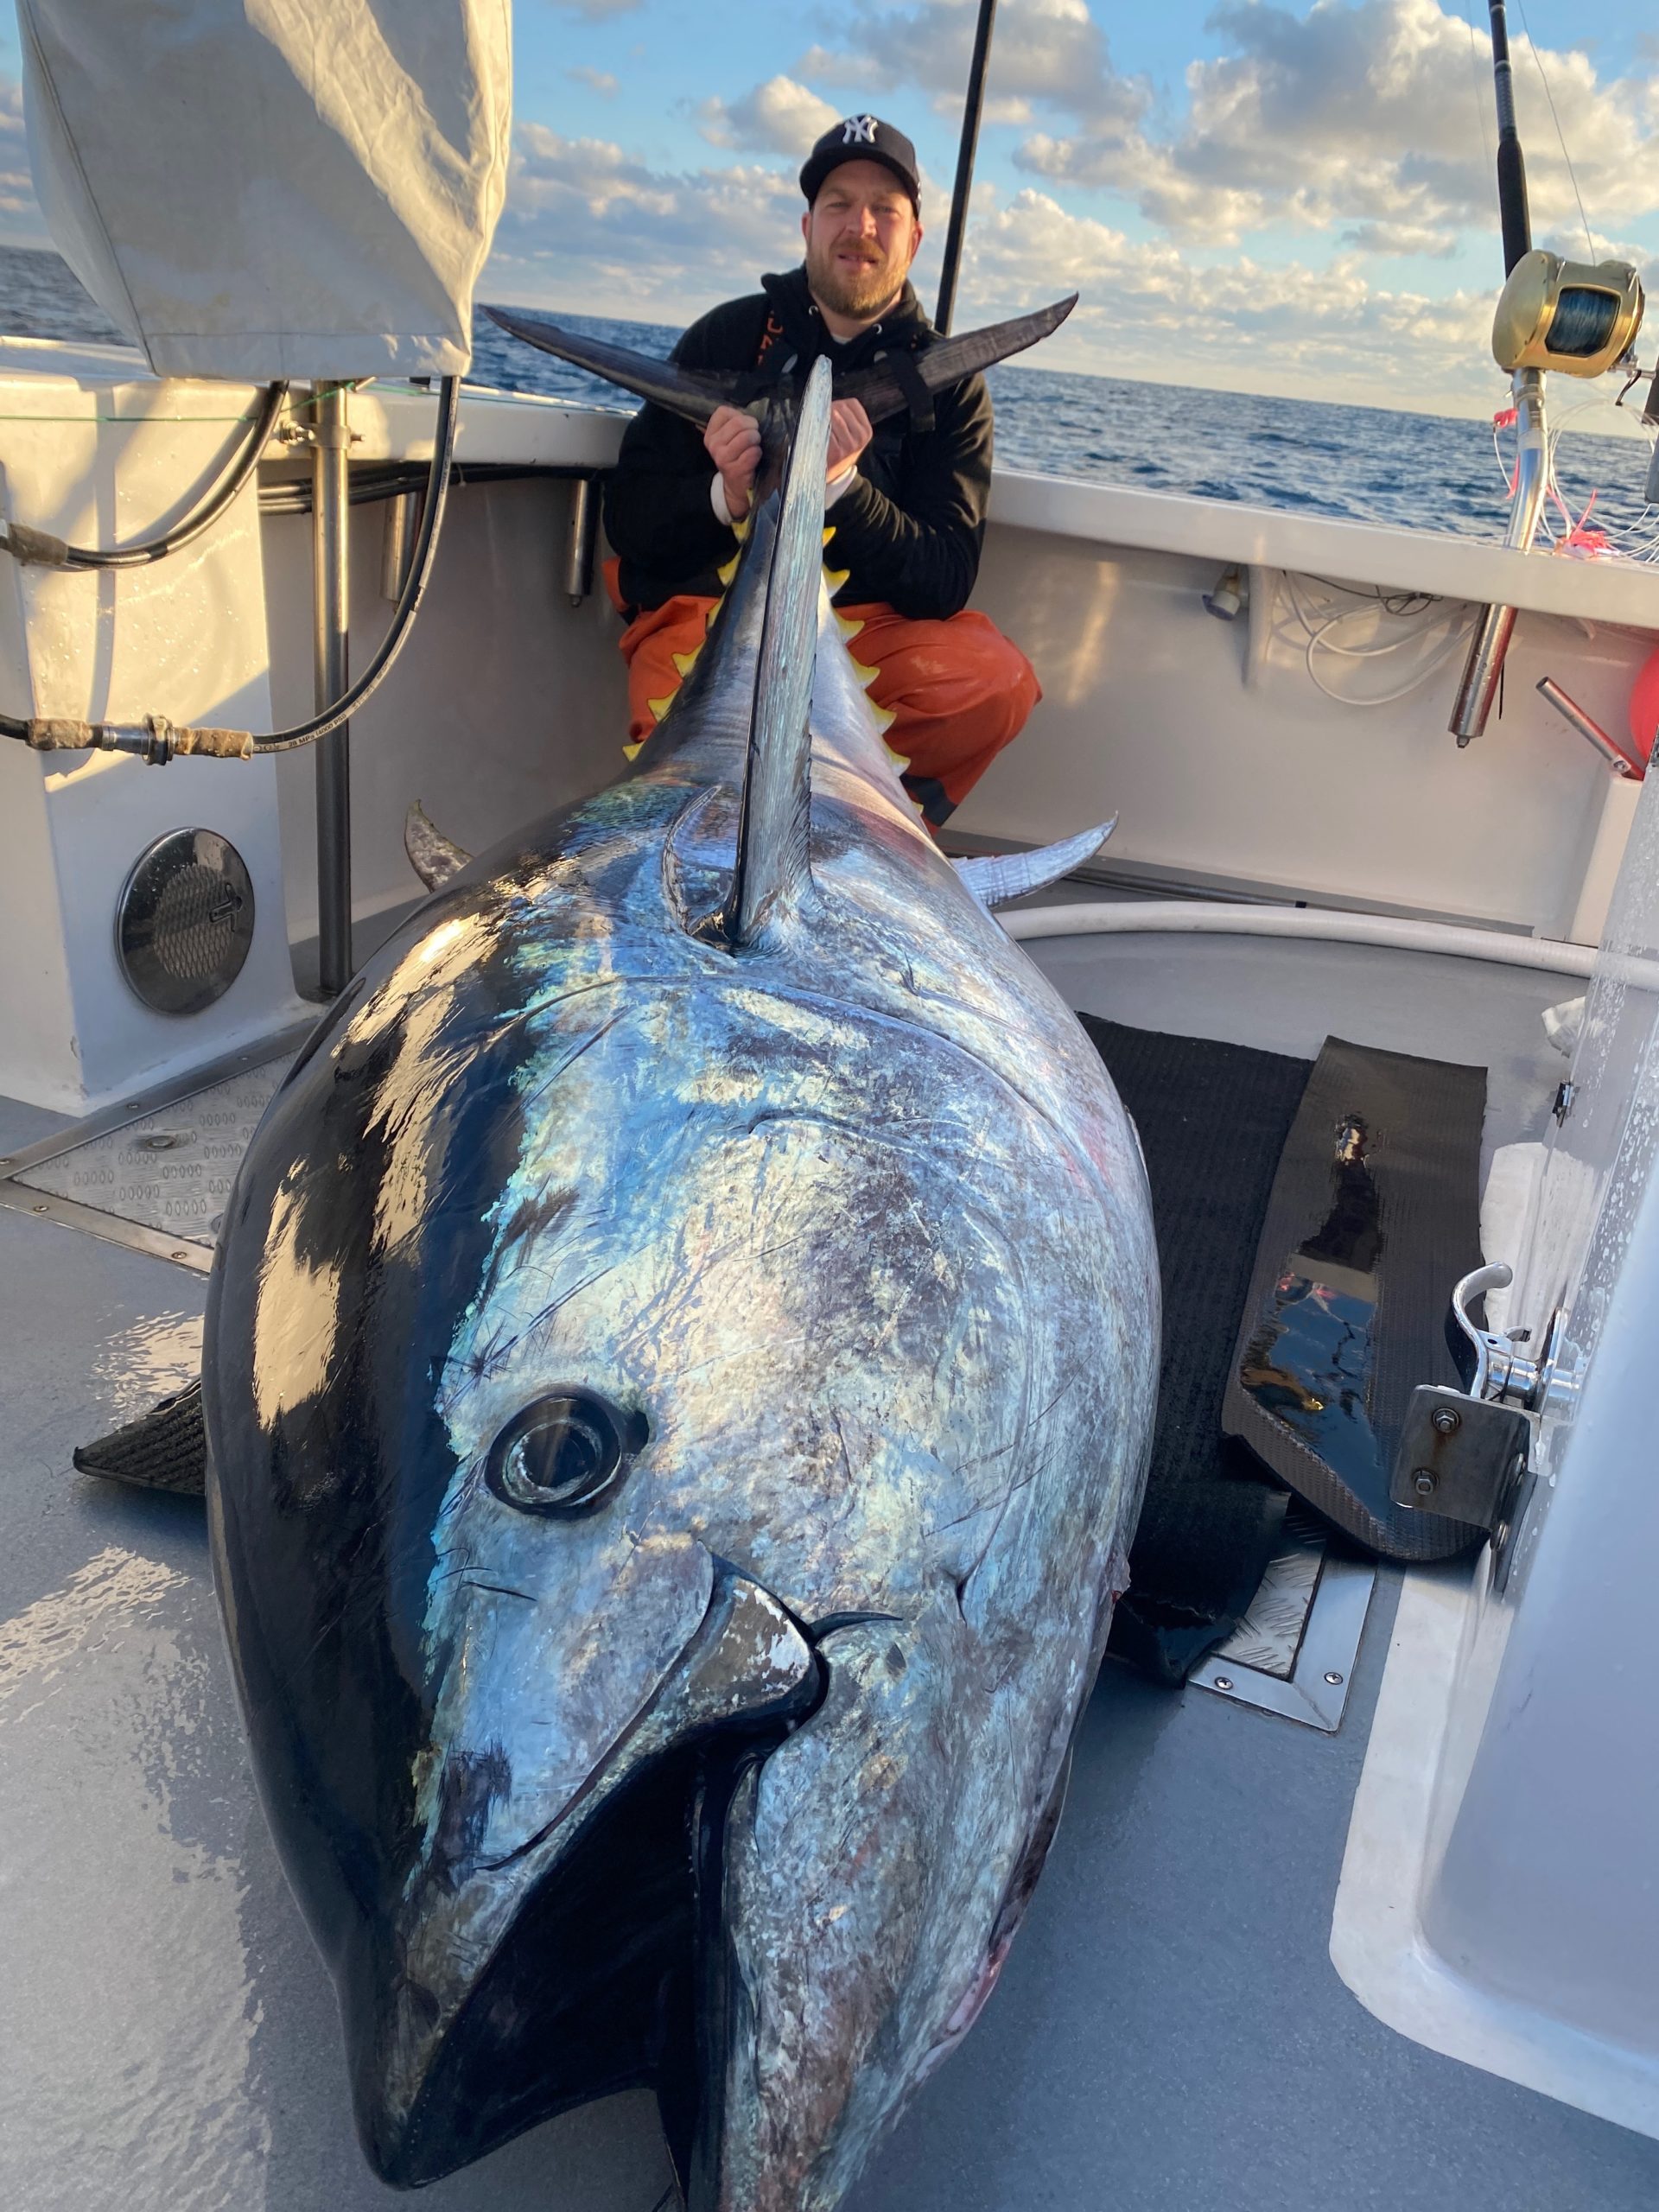 Brian Finnegan and the Flying Dutchman crew decked this 800-pound bluefin off North Carolina last weekend. Bryan Fromm